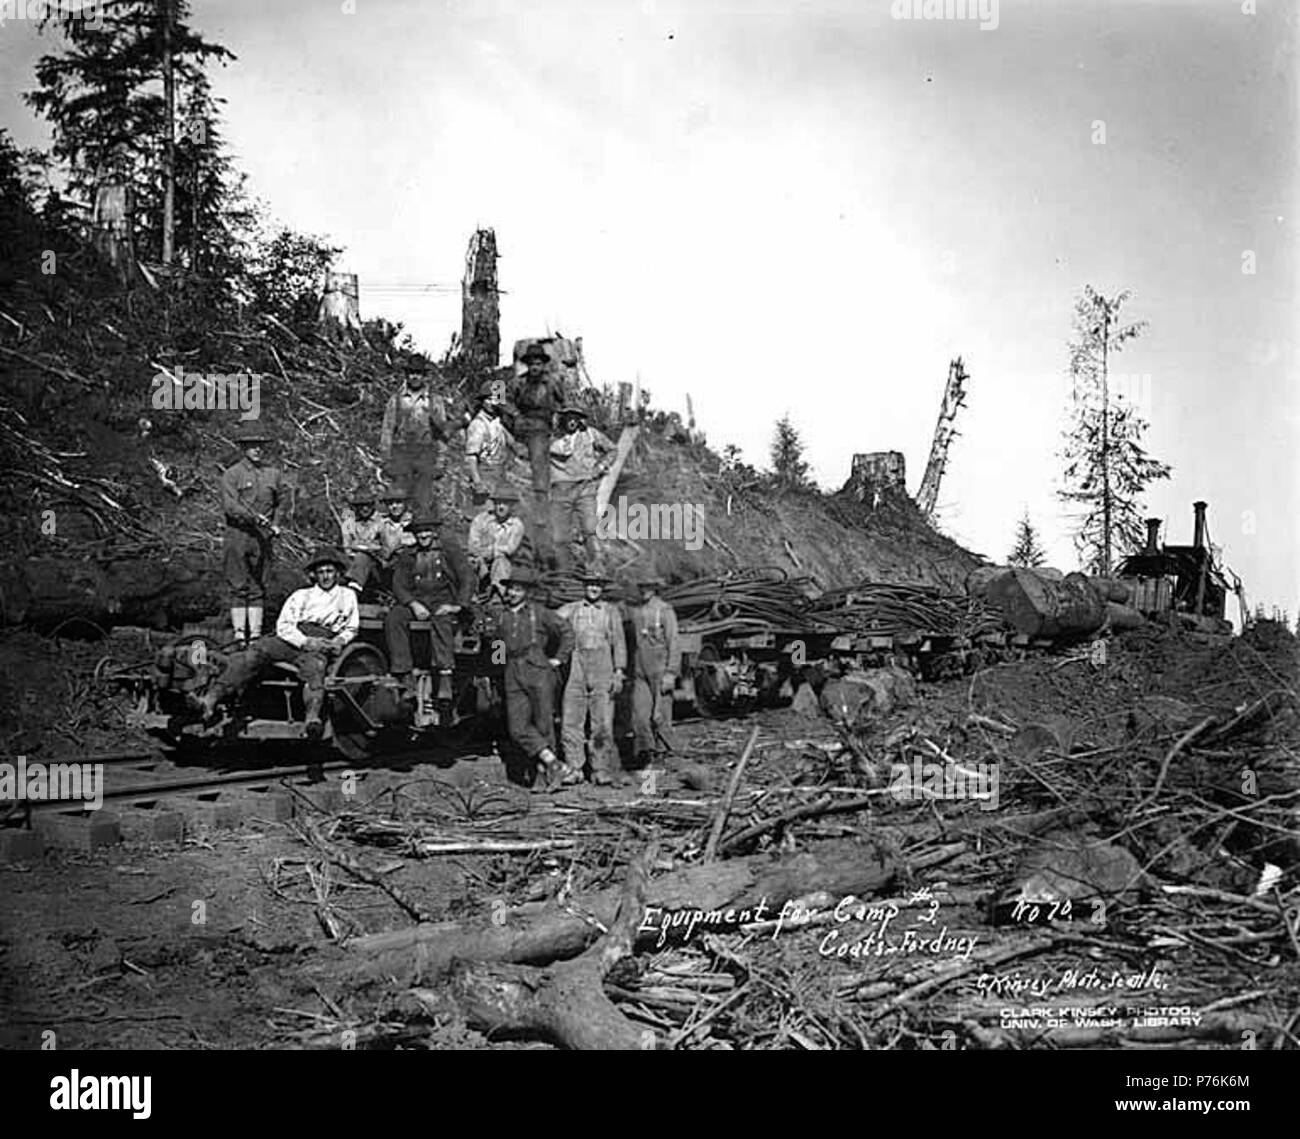 . English: Equipment for camp 3 on flatbed cars, along with crew members, including Spruce Division soldier, Coats-Fordney Lumber Company, near Aberdeen, ca. 1918 . English: Caption on image: Equipment for Camp 3. Coats-Fordney. C. Kinsey Photo, Seattle. No. 70 PH Coll 516.630 The Coats-Fordney Lumber Company started out as the A.F. Coats Lumber Company in 1905, headquartered in Aberdeen. It became the Coats-Fordney Lumber Company in 1910, and by 1924, it was called the Donovan-Corkery Lumber Company. Aberdeen is a city in Grays Harbor (formerly called Chehalis) County. The town was platted by Stock Photo